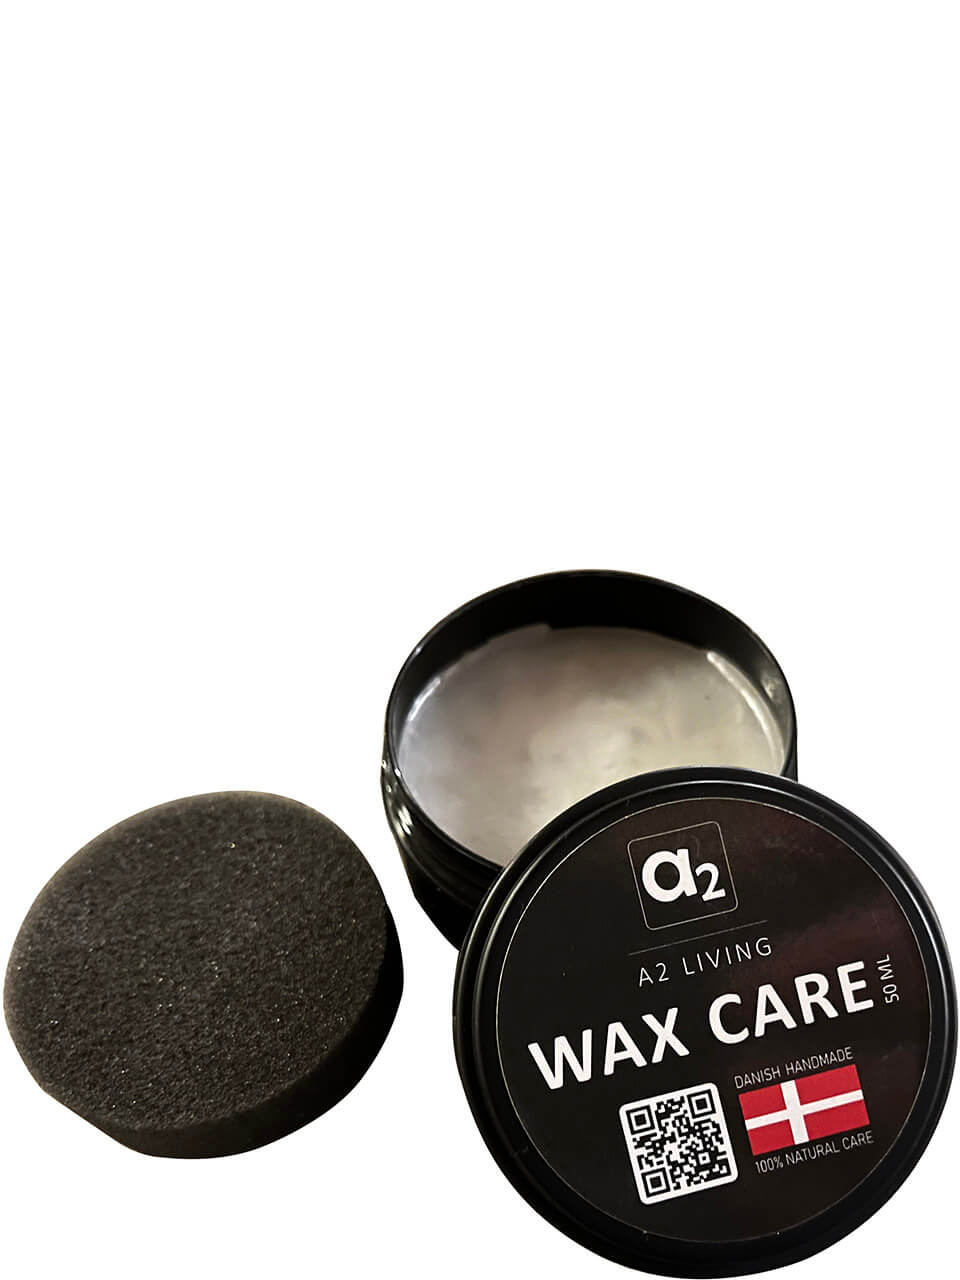 A2 Living Wax Care